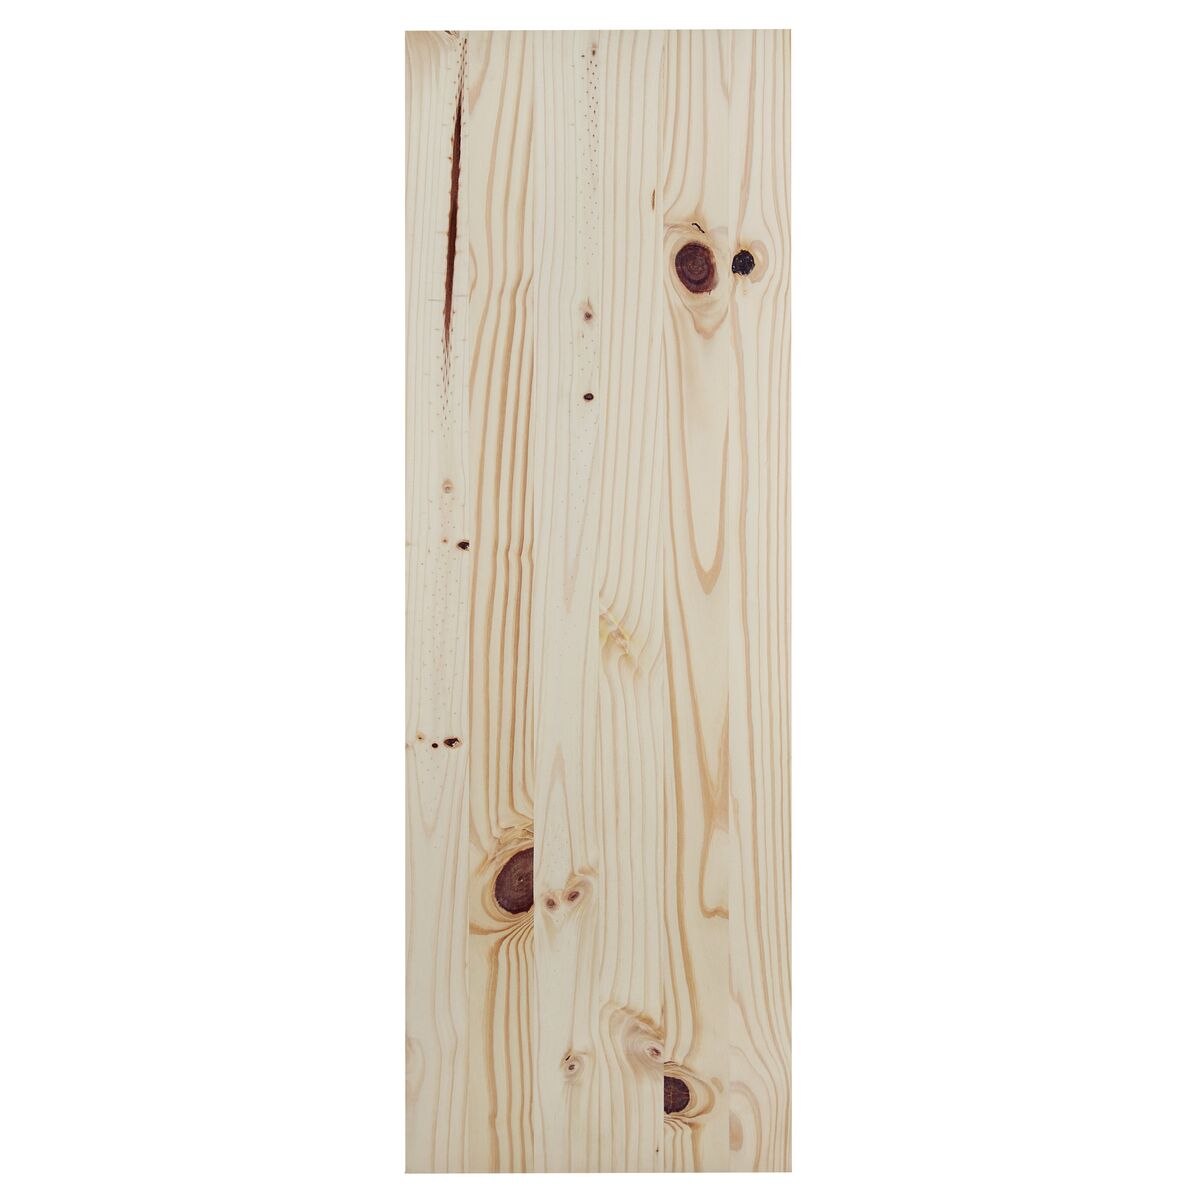 Tramontina Modulare CC 1500x300x18 mm Pine Wood Panel with a Natural Finish